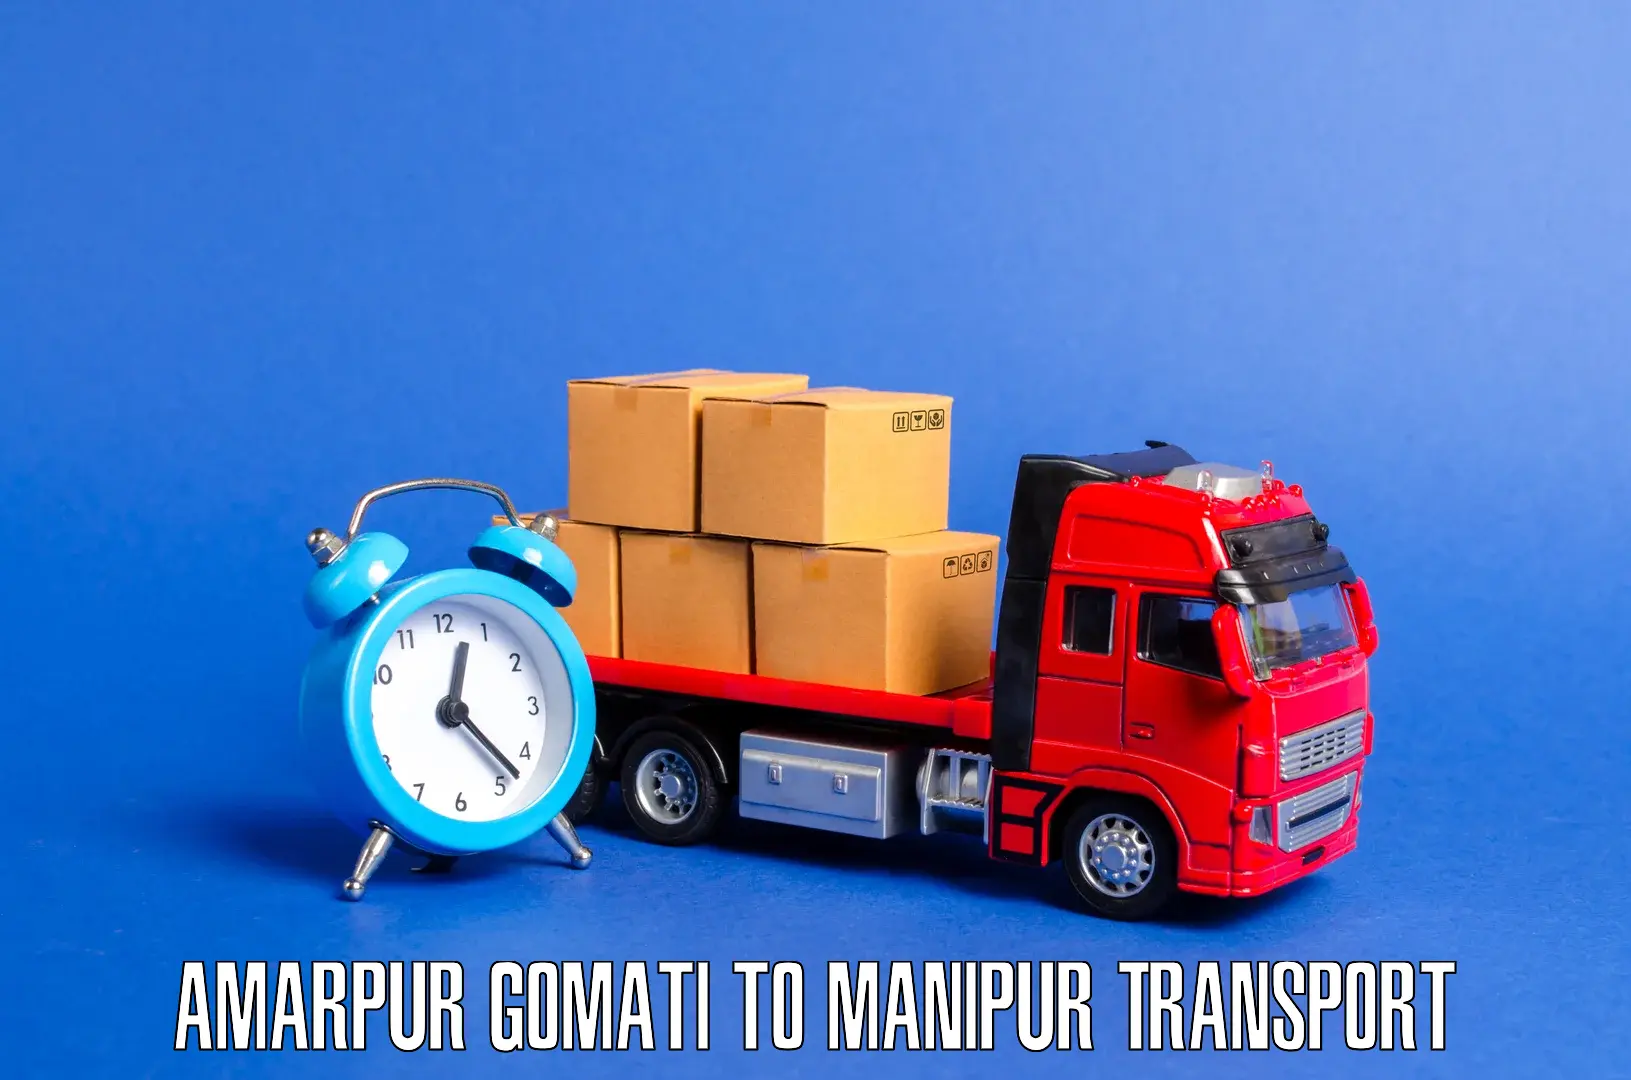 Material transport services Amarpur Gomati to Kakching